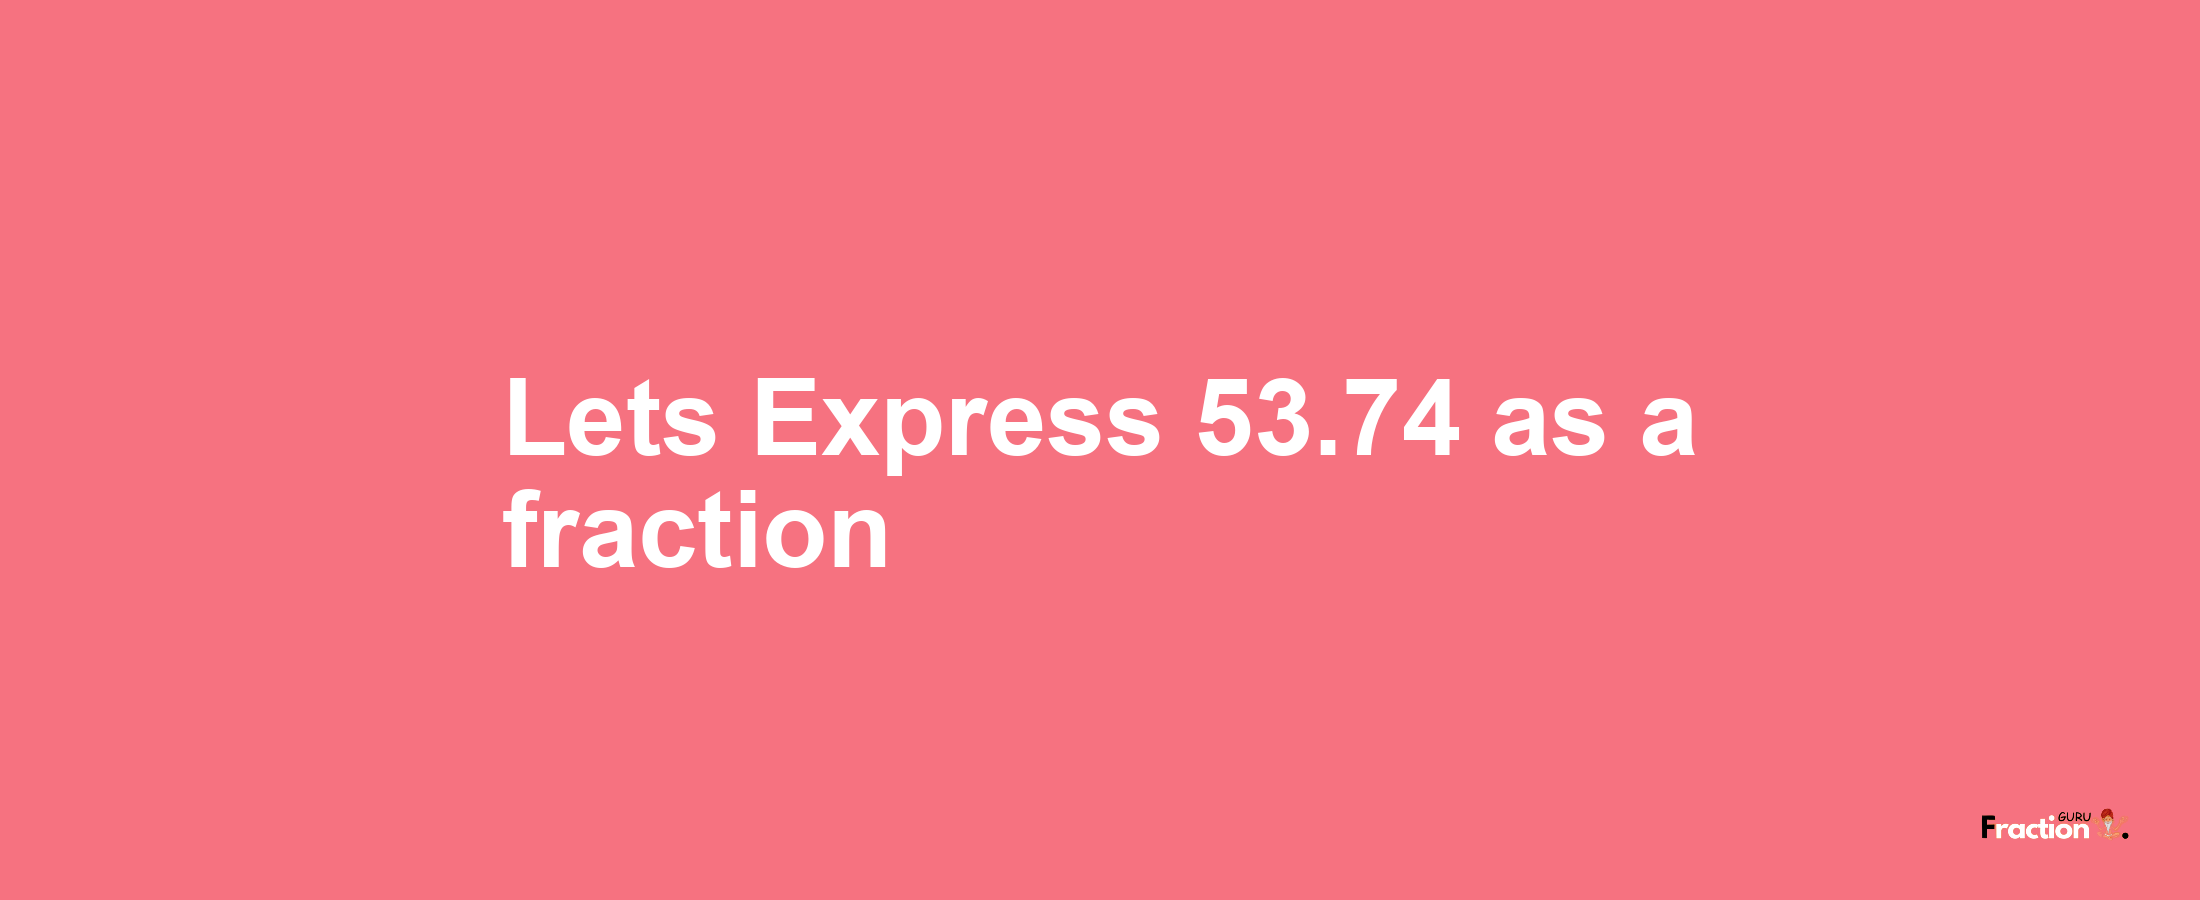 Lets Express 53.74 as afraction